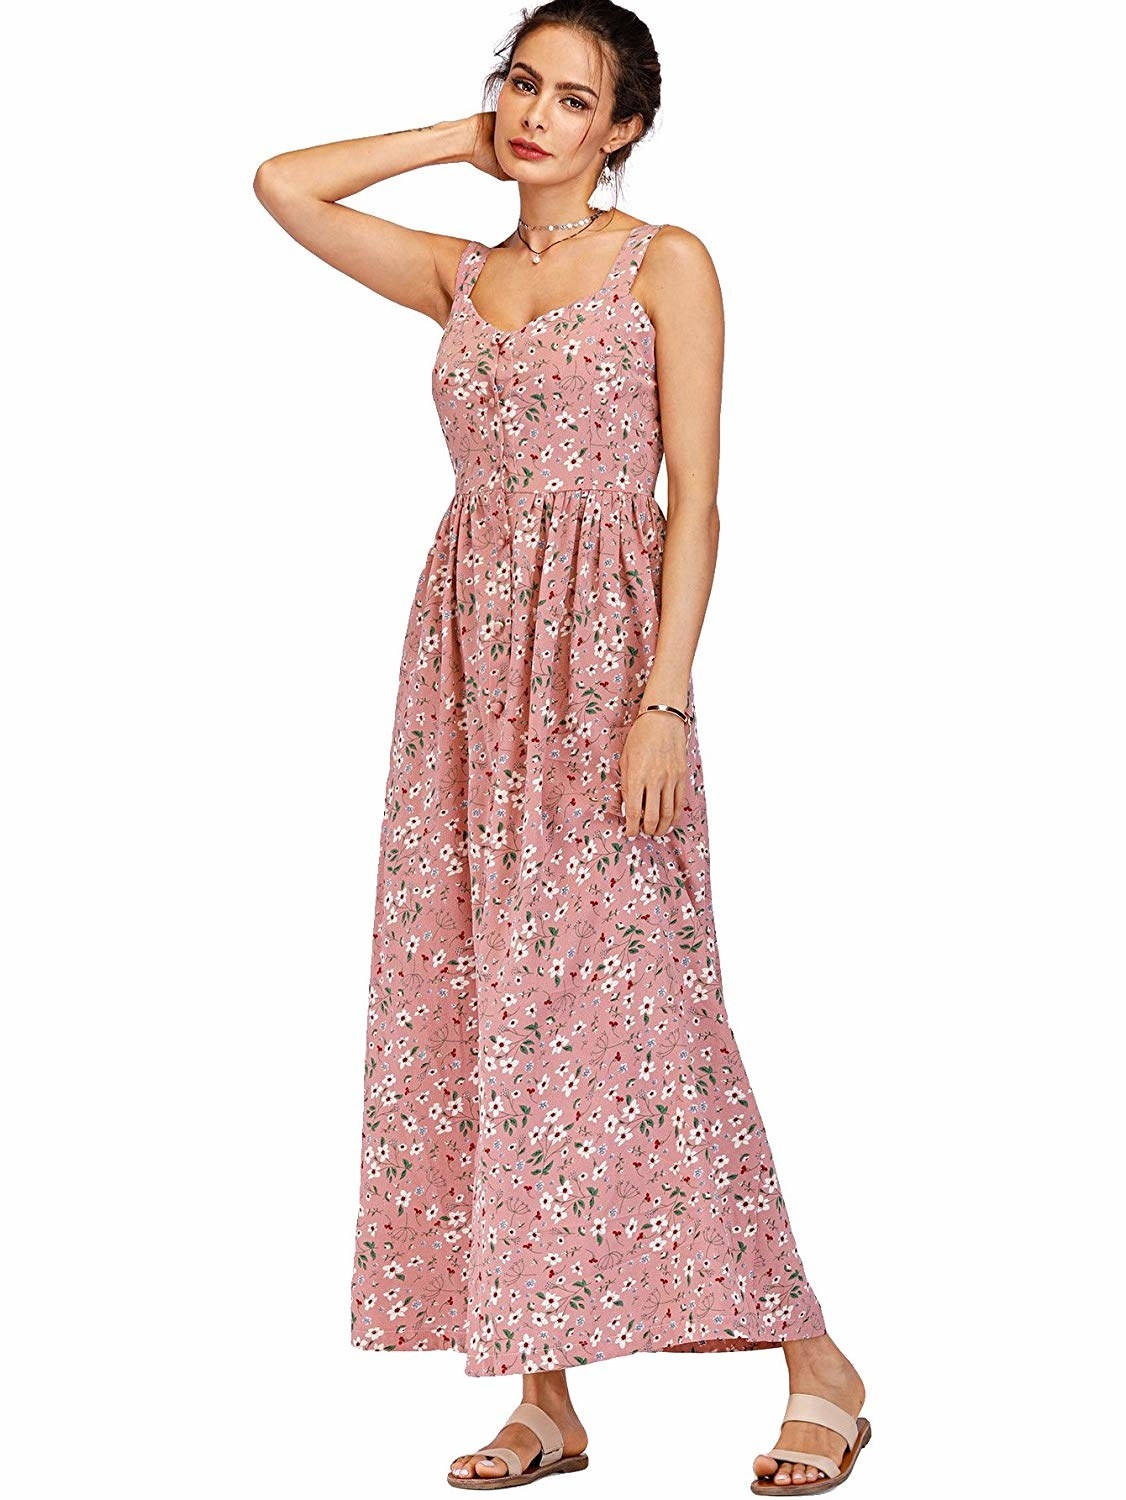 32 Maxi Dresses You Can Get On Amazon That You'll Actually Want To Wear